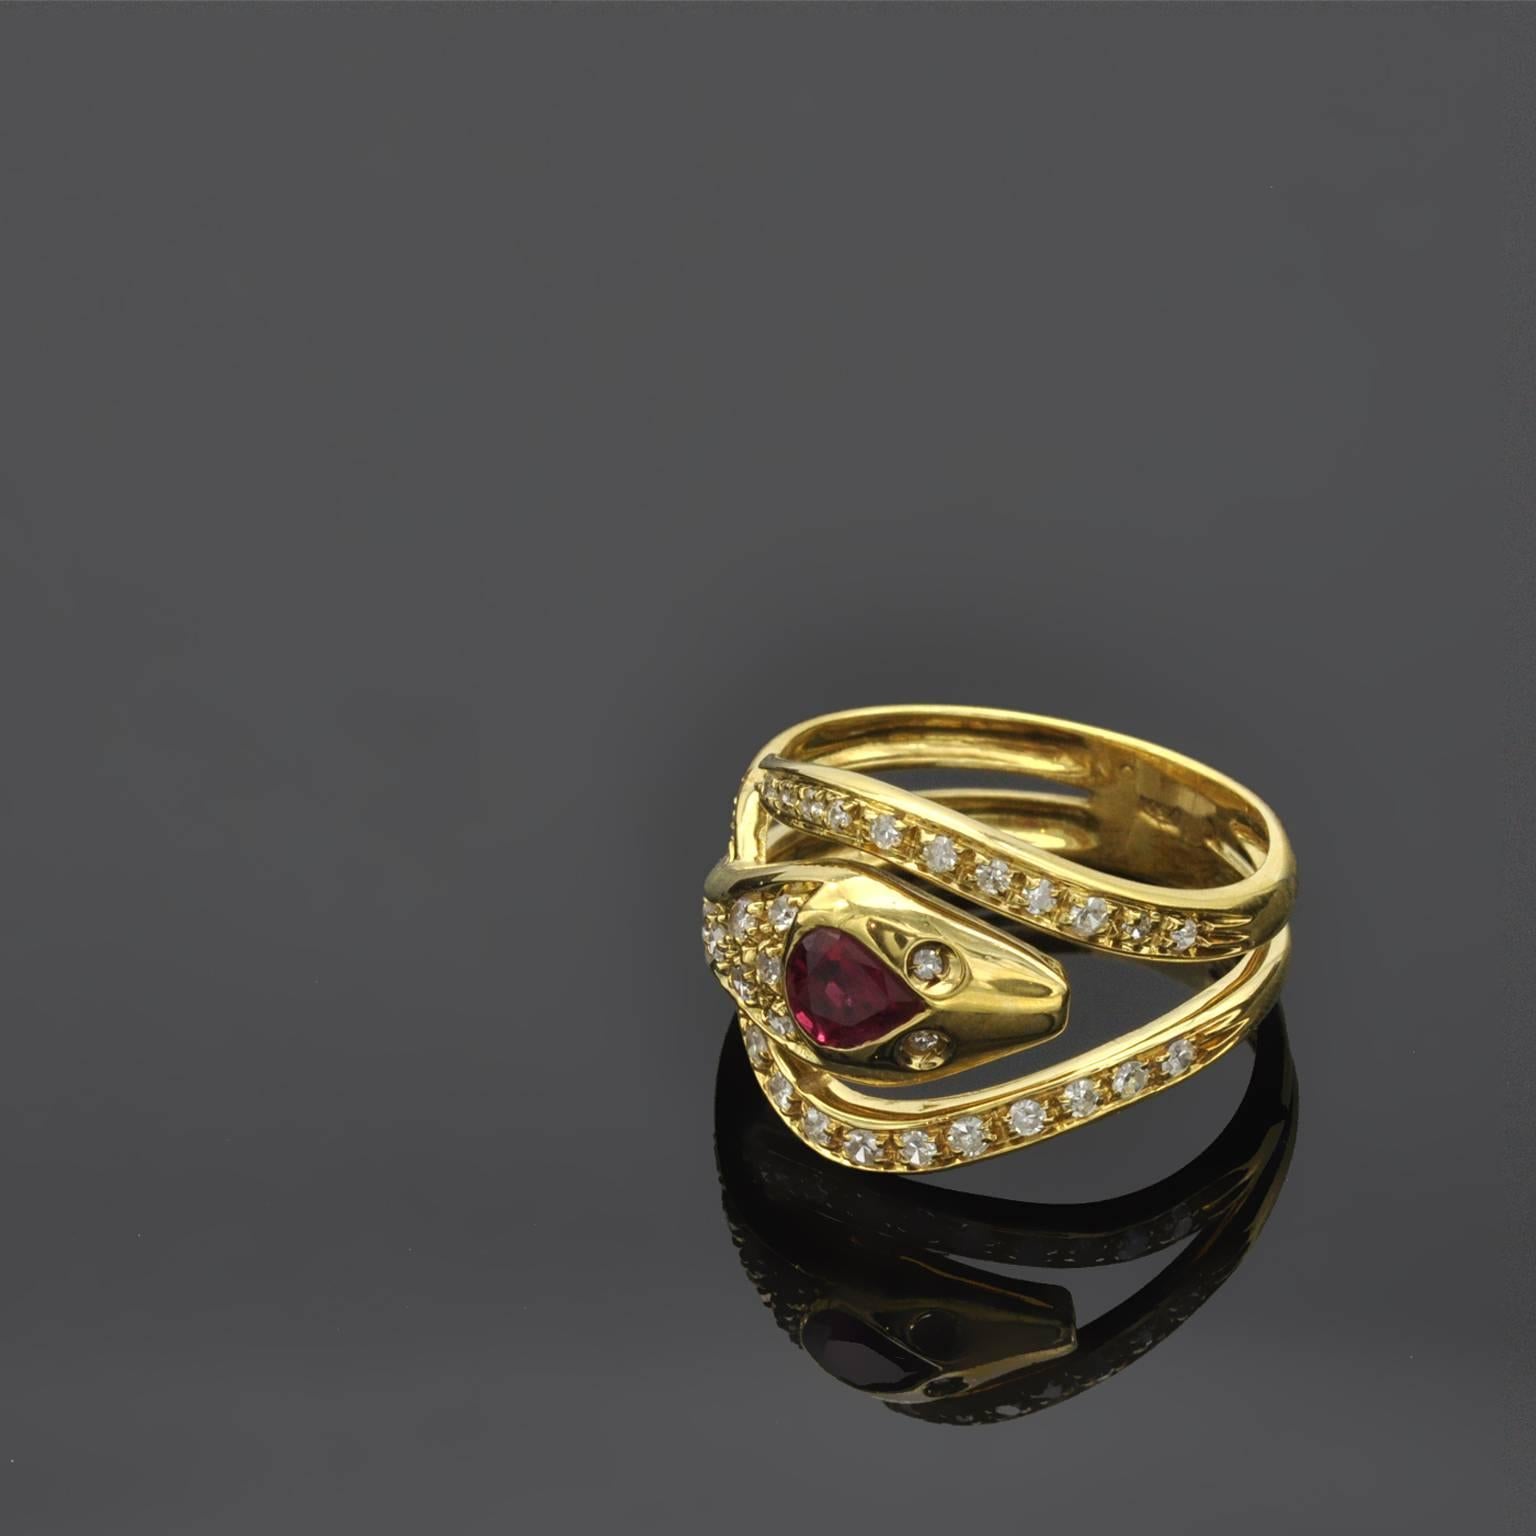 A 18kt yellow gold snake ring wrapping around the finger ring. A pear shaped ruby on its head the eyes and body are set with diamonds.